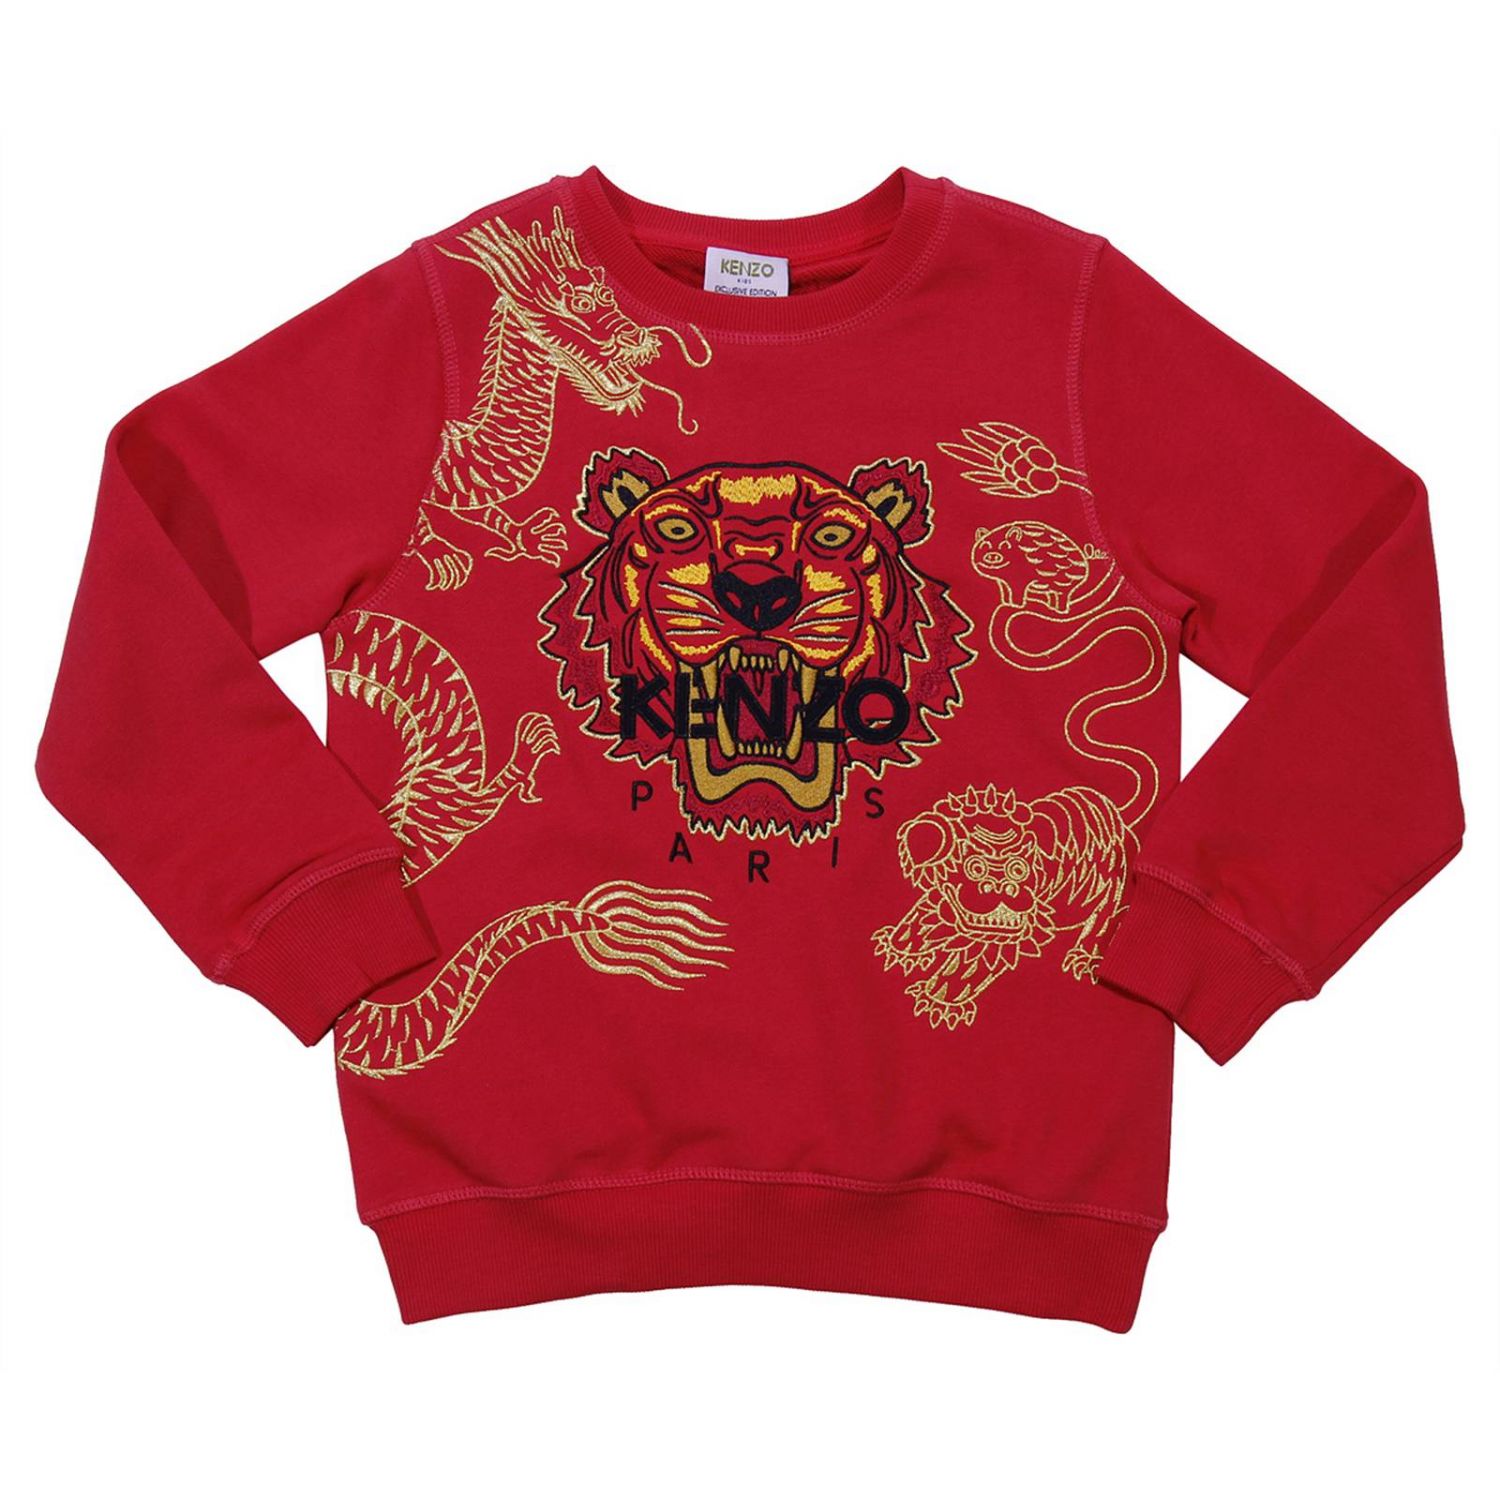 kenzo sweaters for toddlers